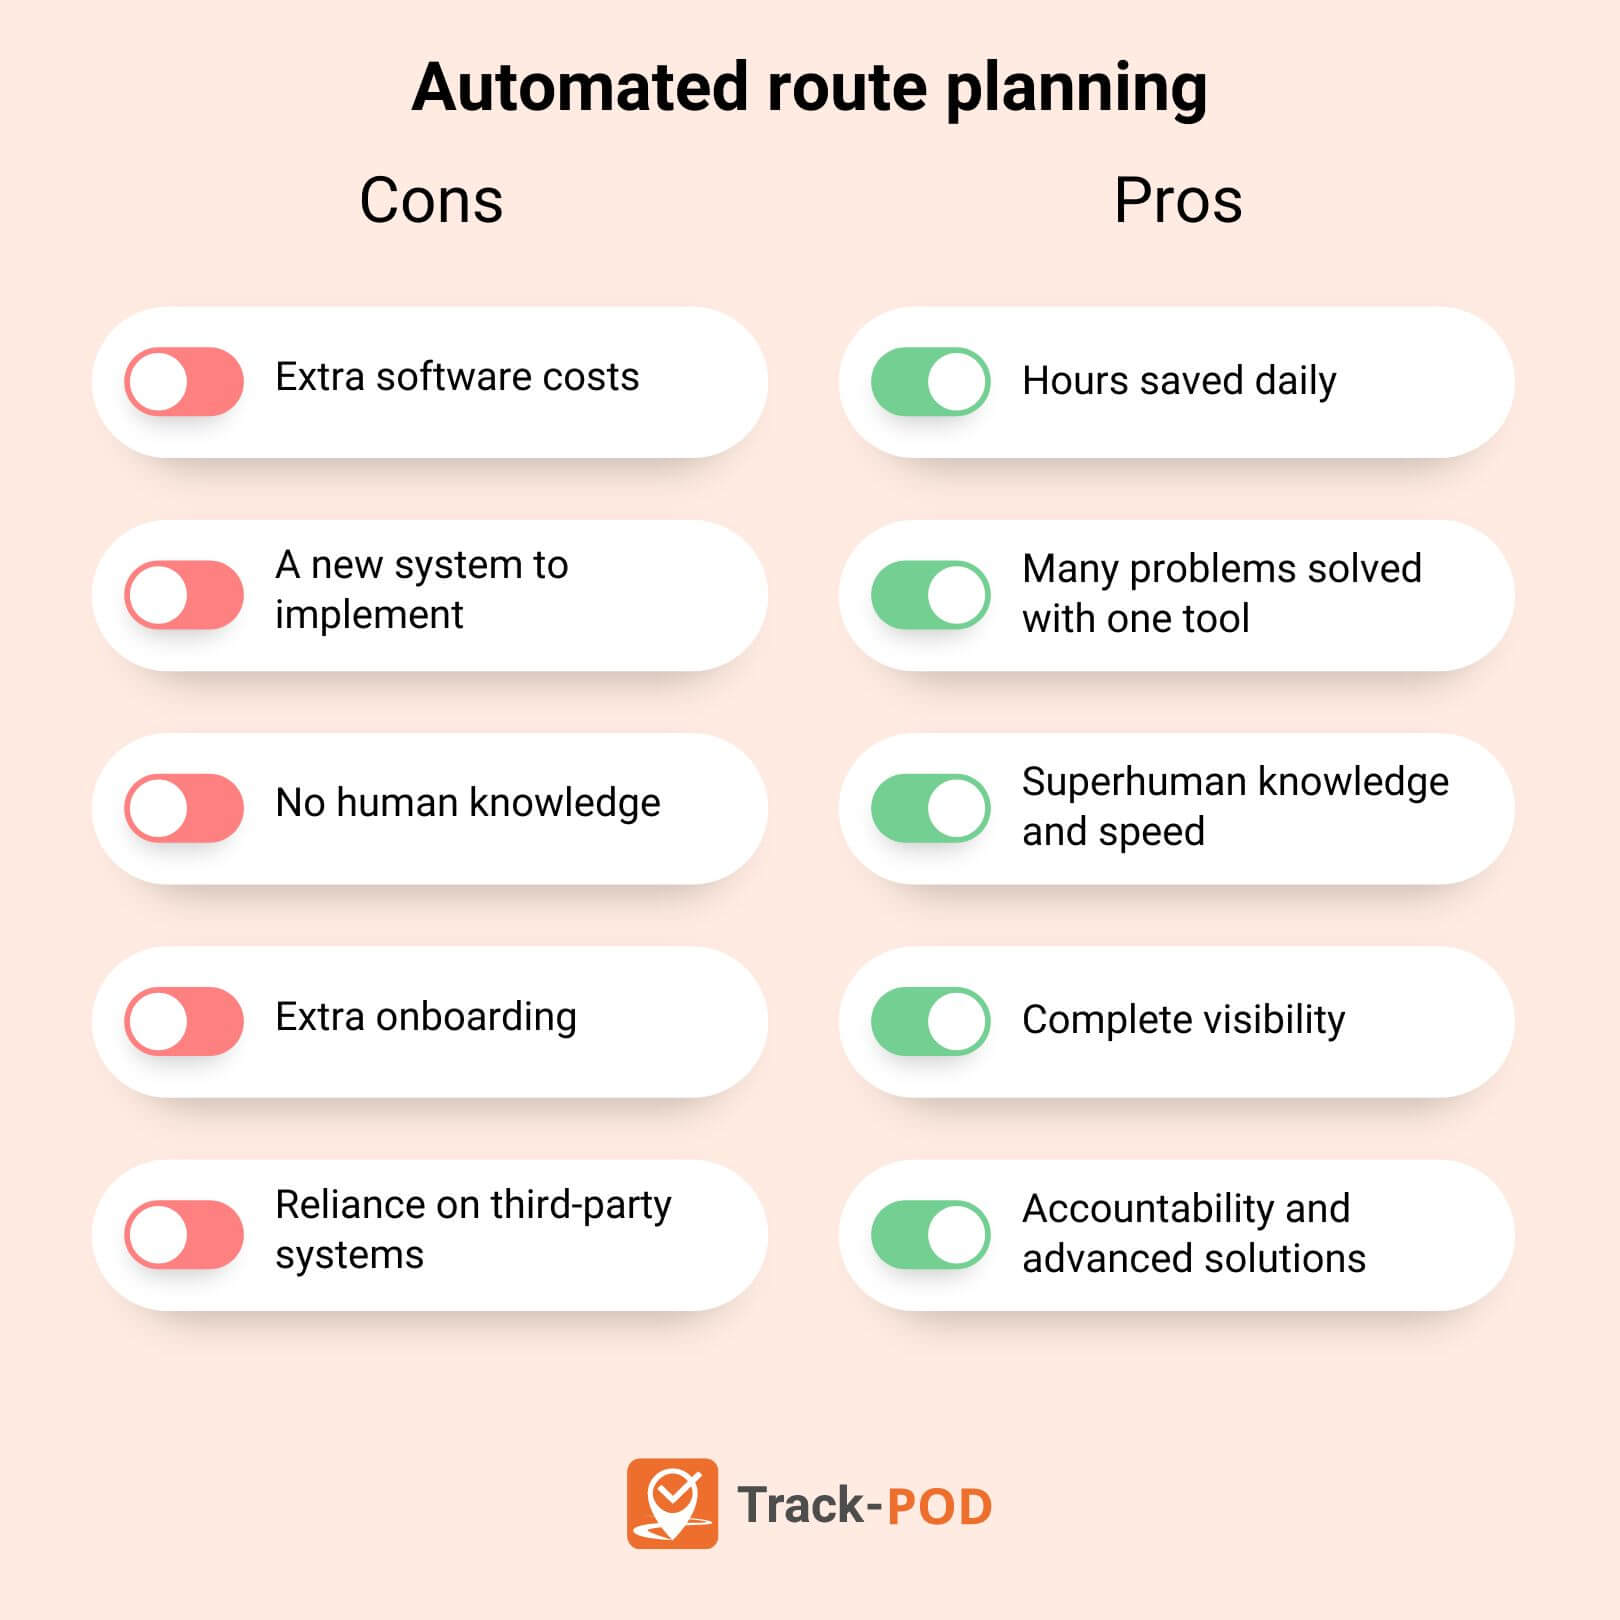 Automated route planning pros and cons